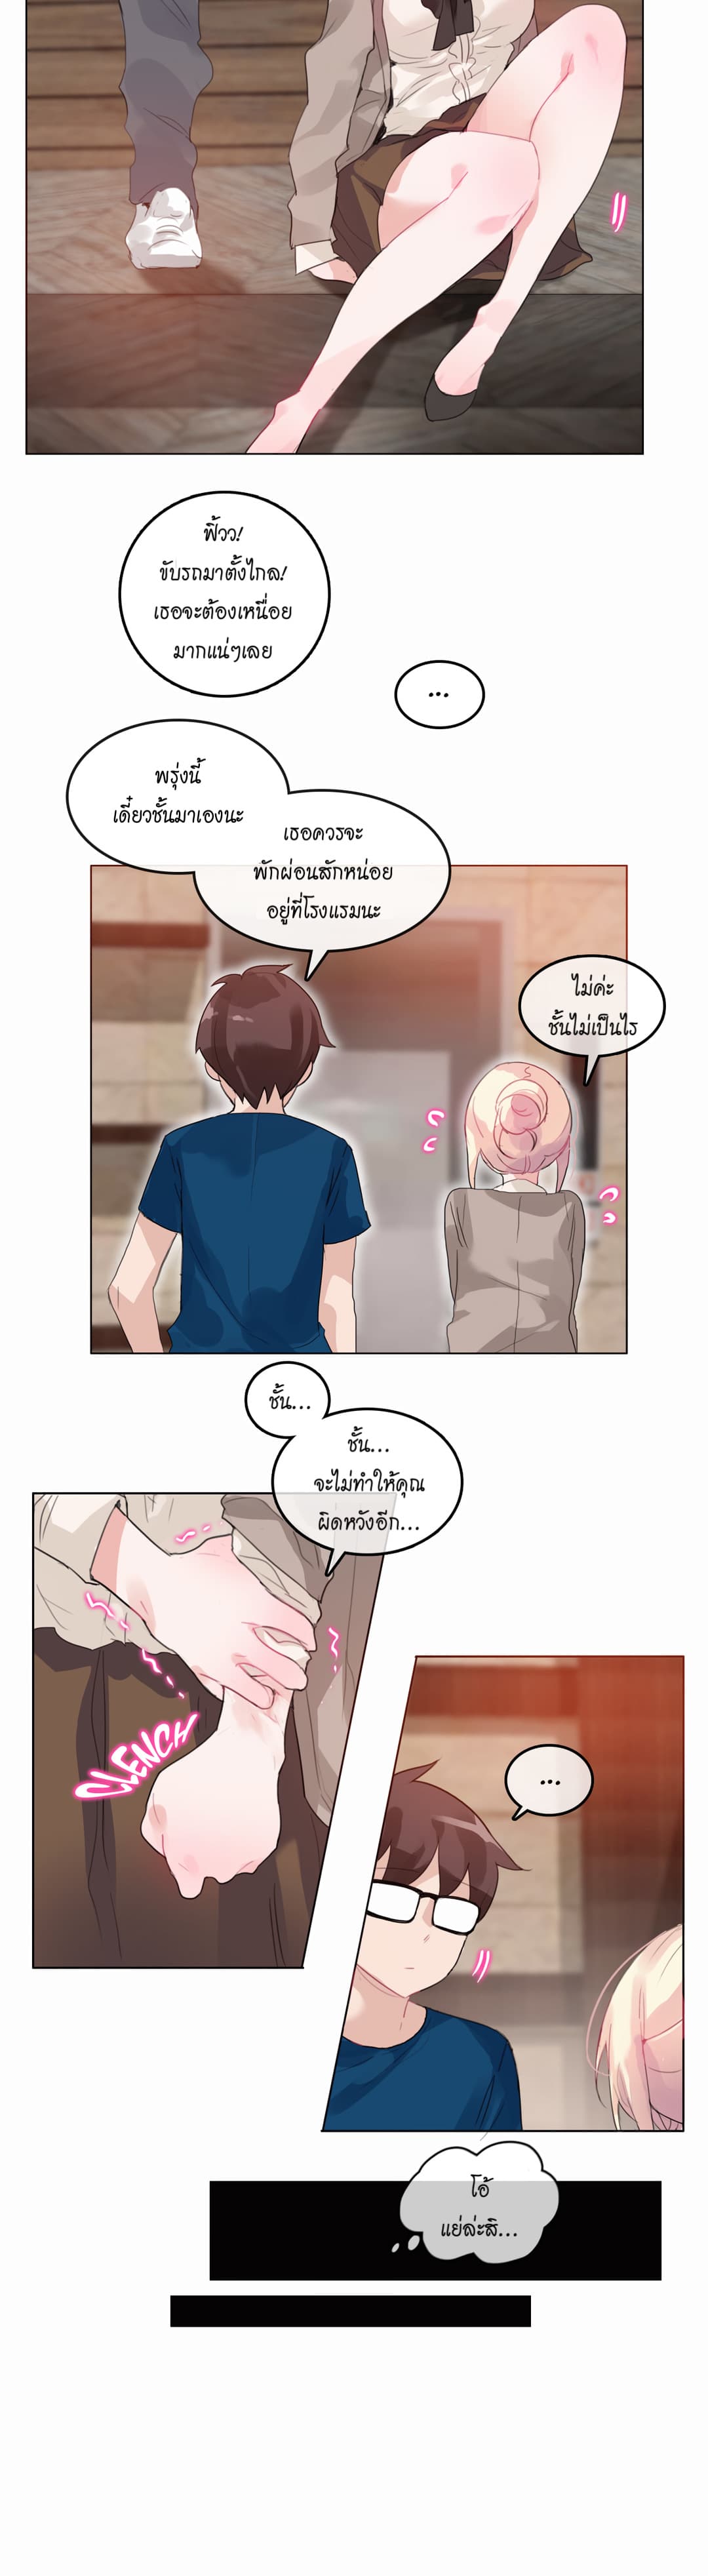 A Pervert’s Daily Life 20 (4)